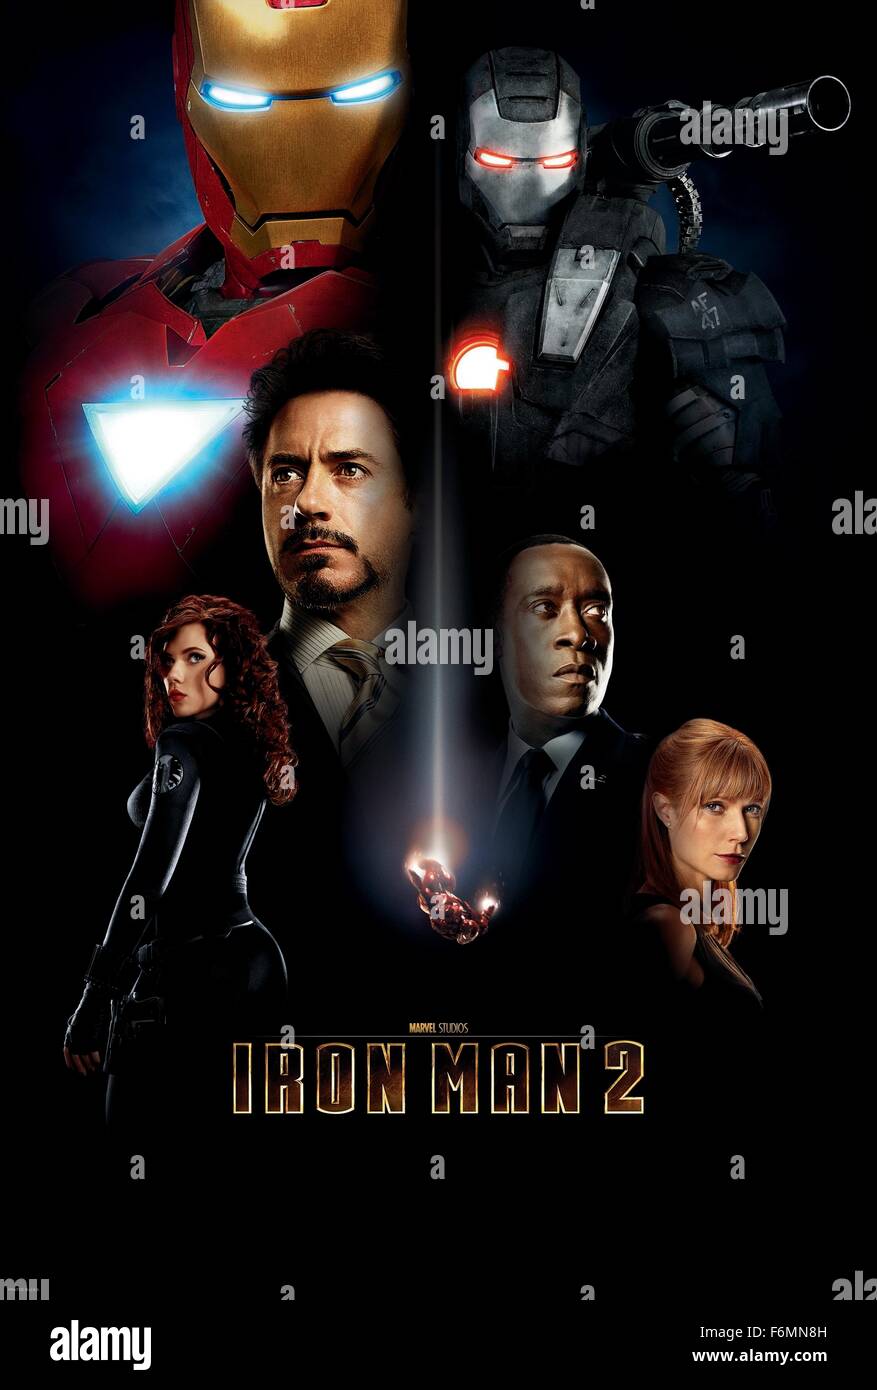 RELEASE DATE: May 7, 2010 MOVIE TITLE: Iron Man 2 STUDIO Stock ...